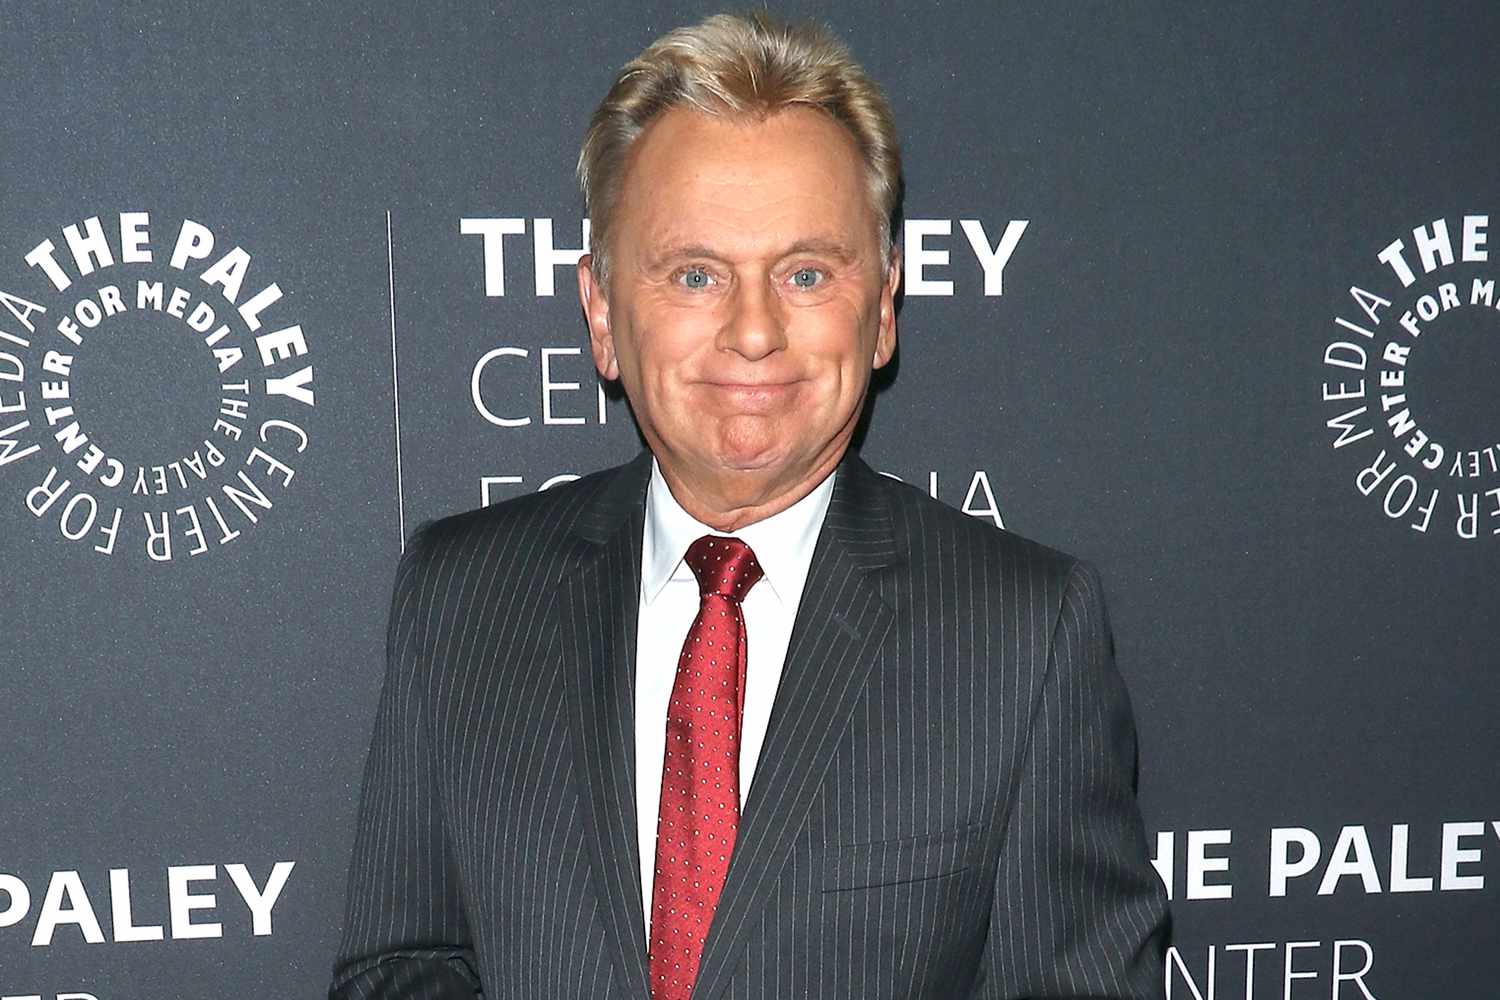 The Shocking Transformation Of Pat Sajak: You Won't Believe When He Started Wearing A Wig!